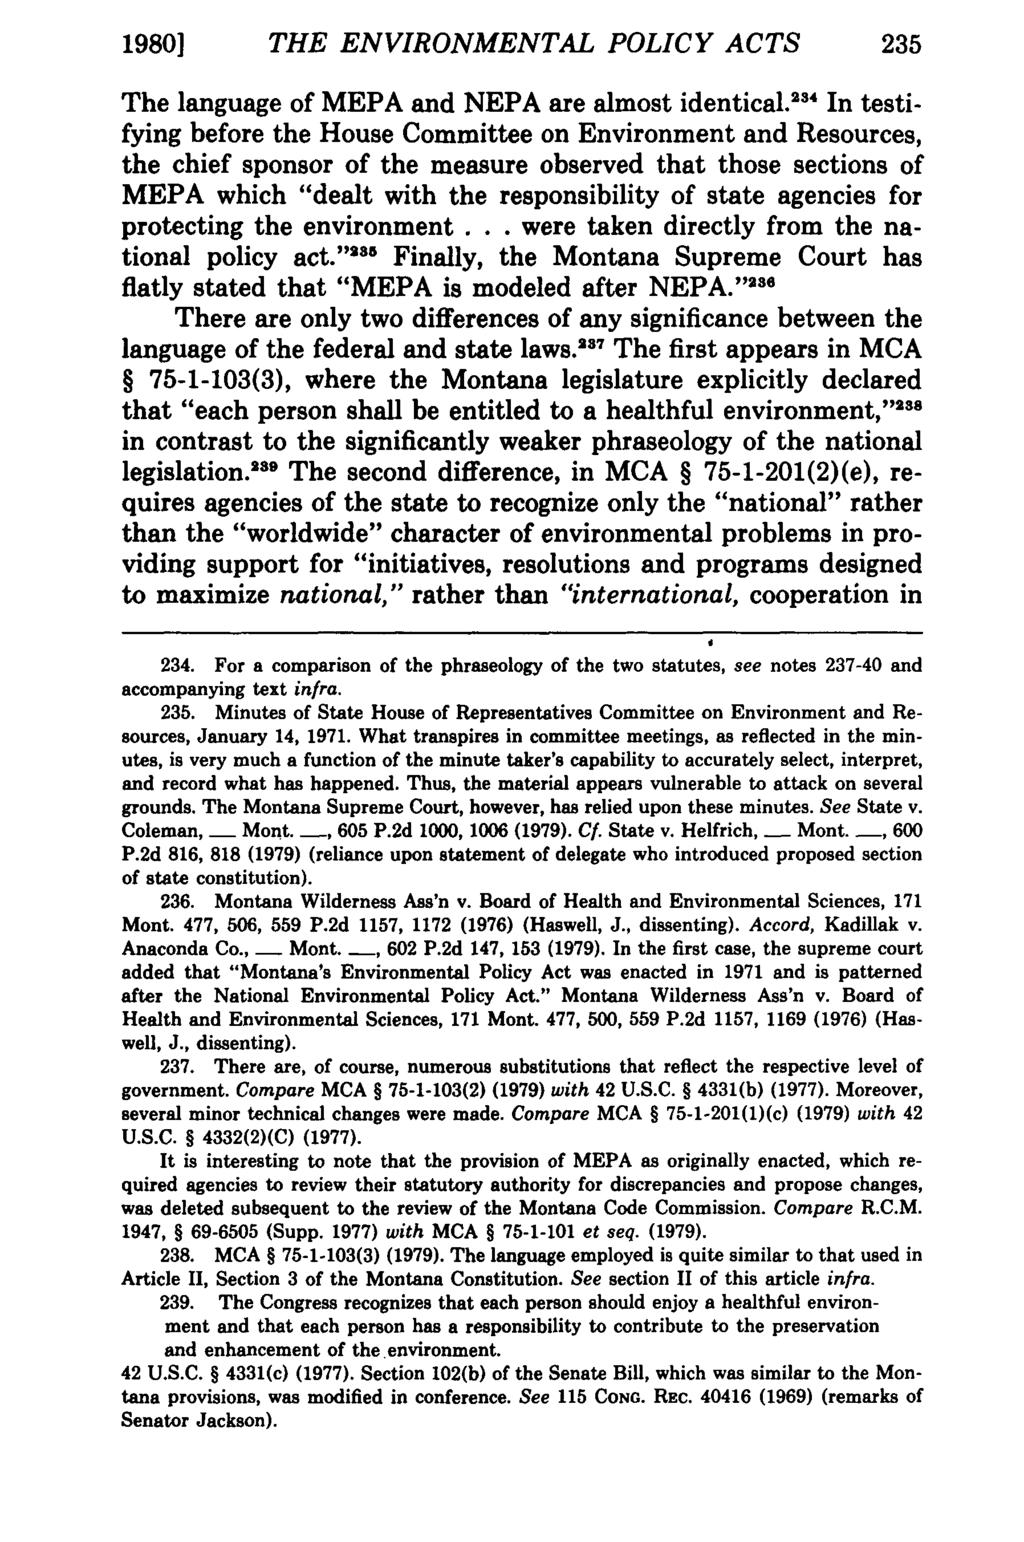 1980) THE ENVIRONMENT AL POLICY ACTS 235 The language of MEPA and NEPA are almost identical.